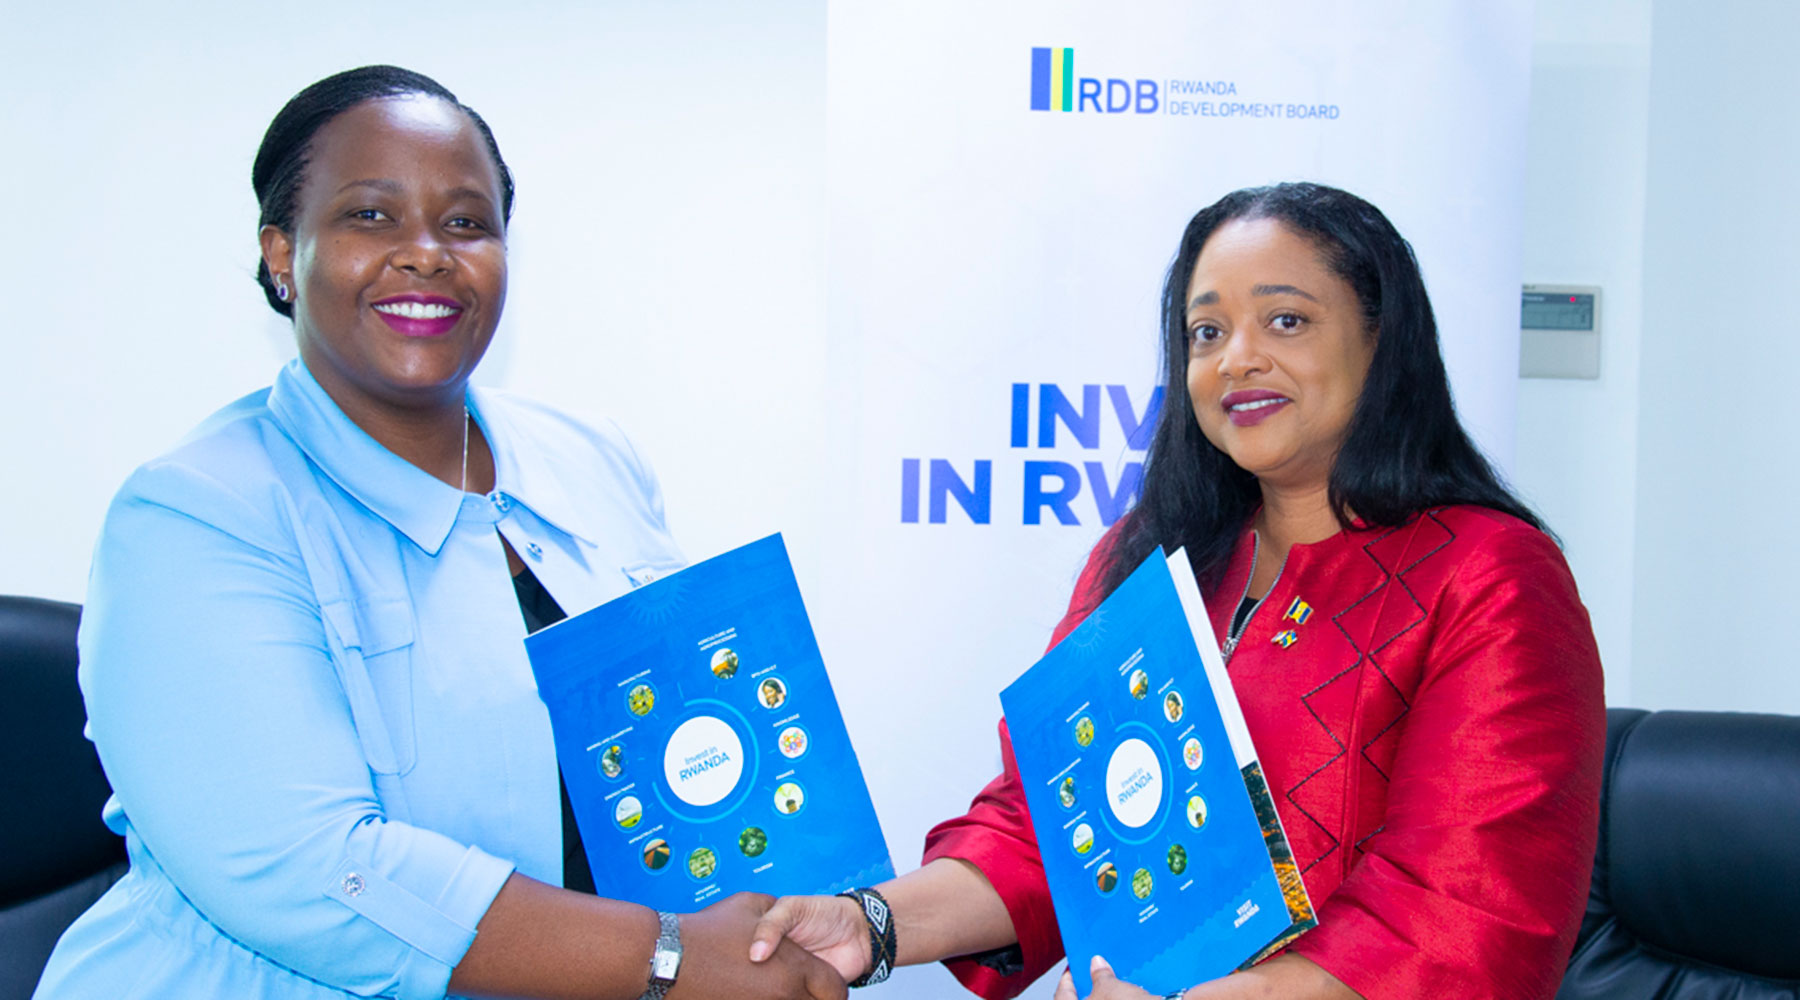 Clare Akamanzi, Rwanda Development Board Chief Executive (left), and Kaye-Anne Greenidge, Chief Executive of Barbados International Business Promotion Corporation, shake hands during the signing ceremony in Kigali on June 24. The agreement seeks to promote and implement strategic private sector investments in both countries. 